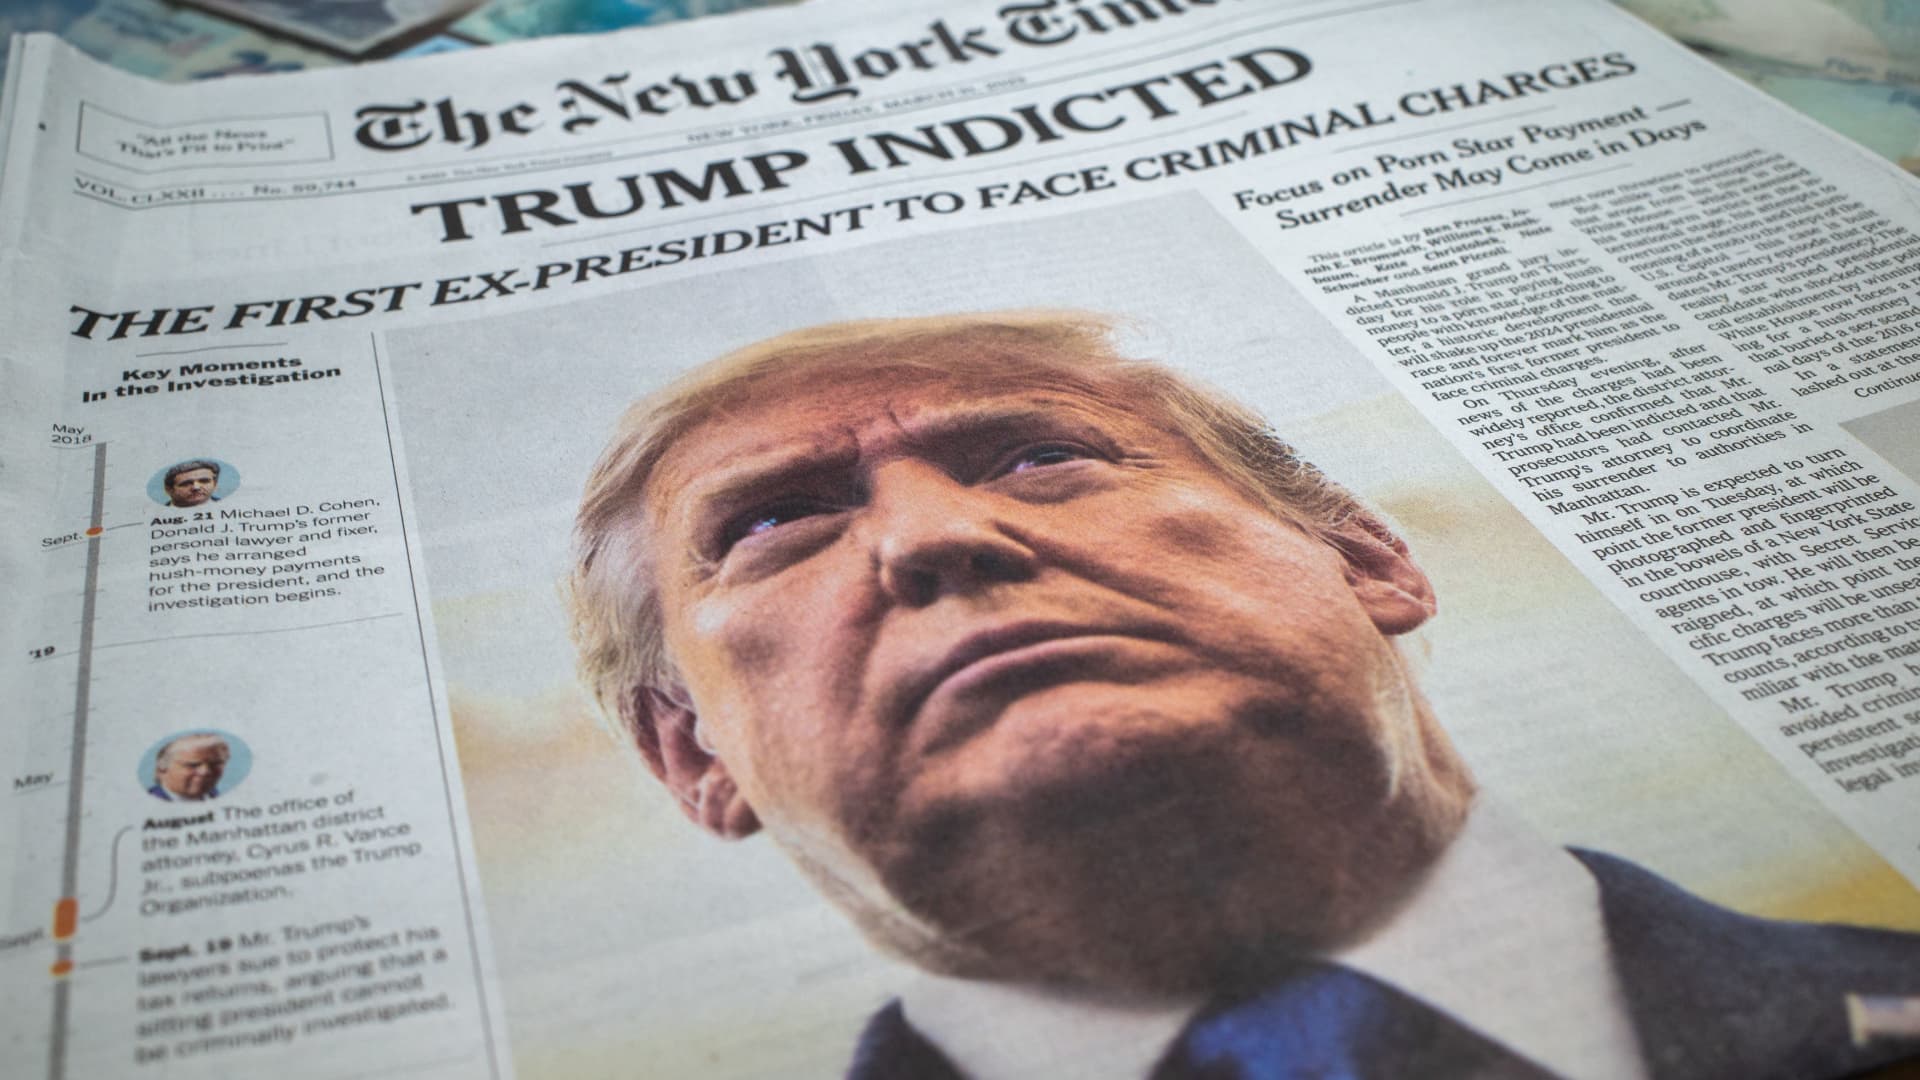 A New York Times newspaper is displayed at a newsstand following former U.S. President Donald Trump's indictment by a Manhattan grand jury following a probe into hush money paid to porn star Stormy Daniels, in New York City, U.S. March 31, 2023.